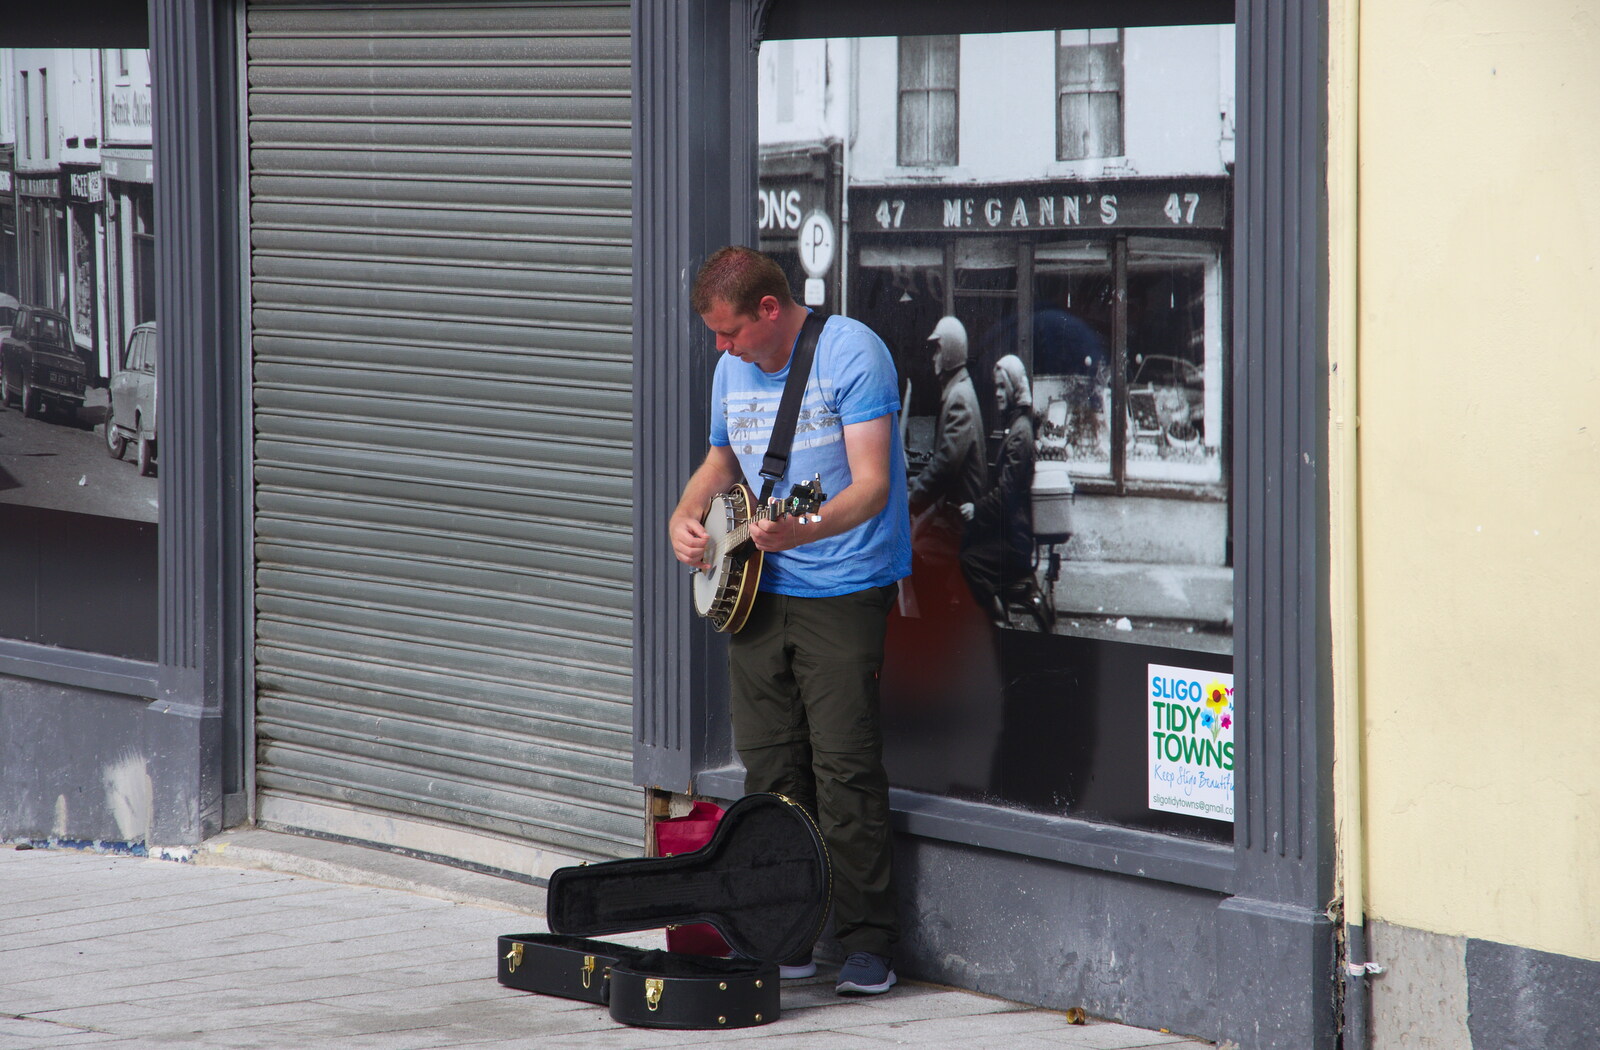 A dude plays the banjo on a street corner from Florence Court and a Postcard from Sligo, Fermanagh and Sligo, Ireland - 21st August 2019